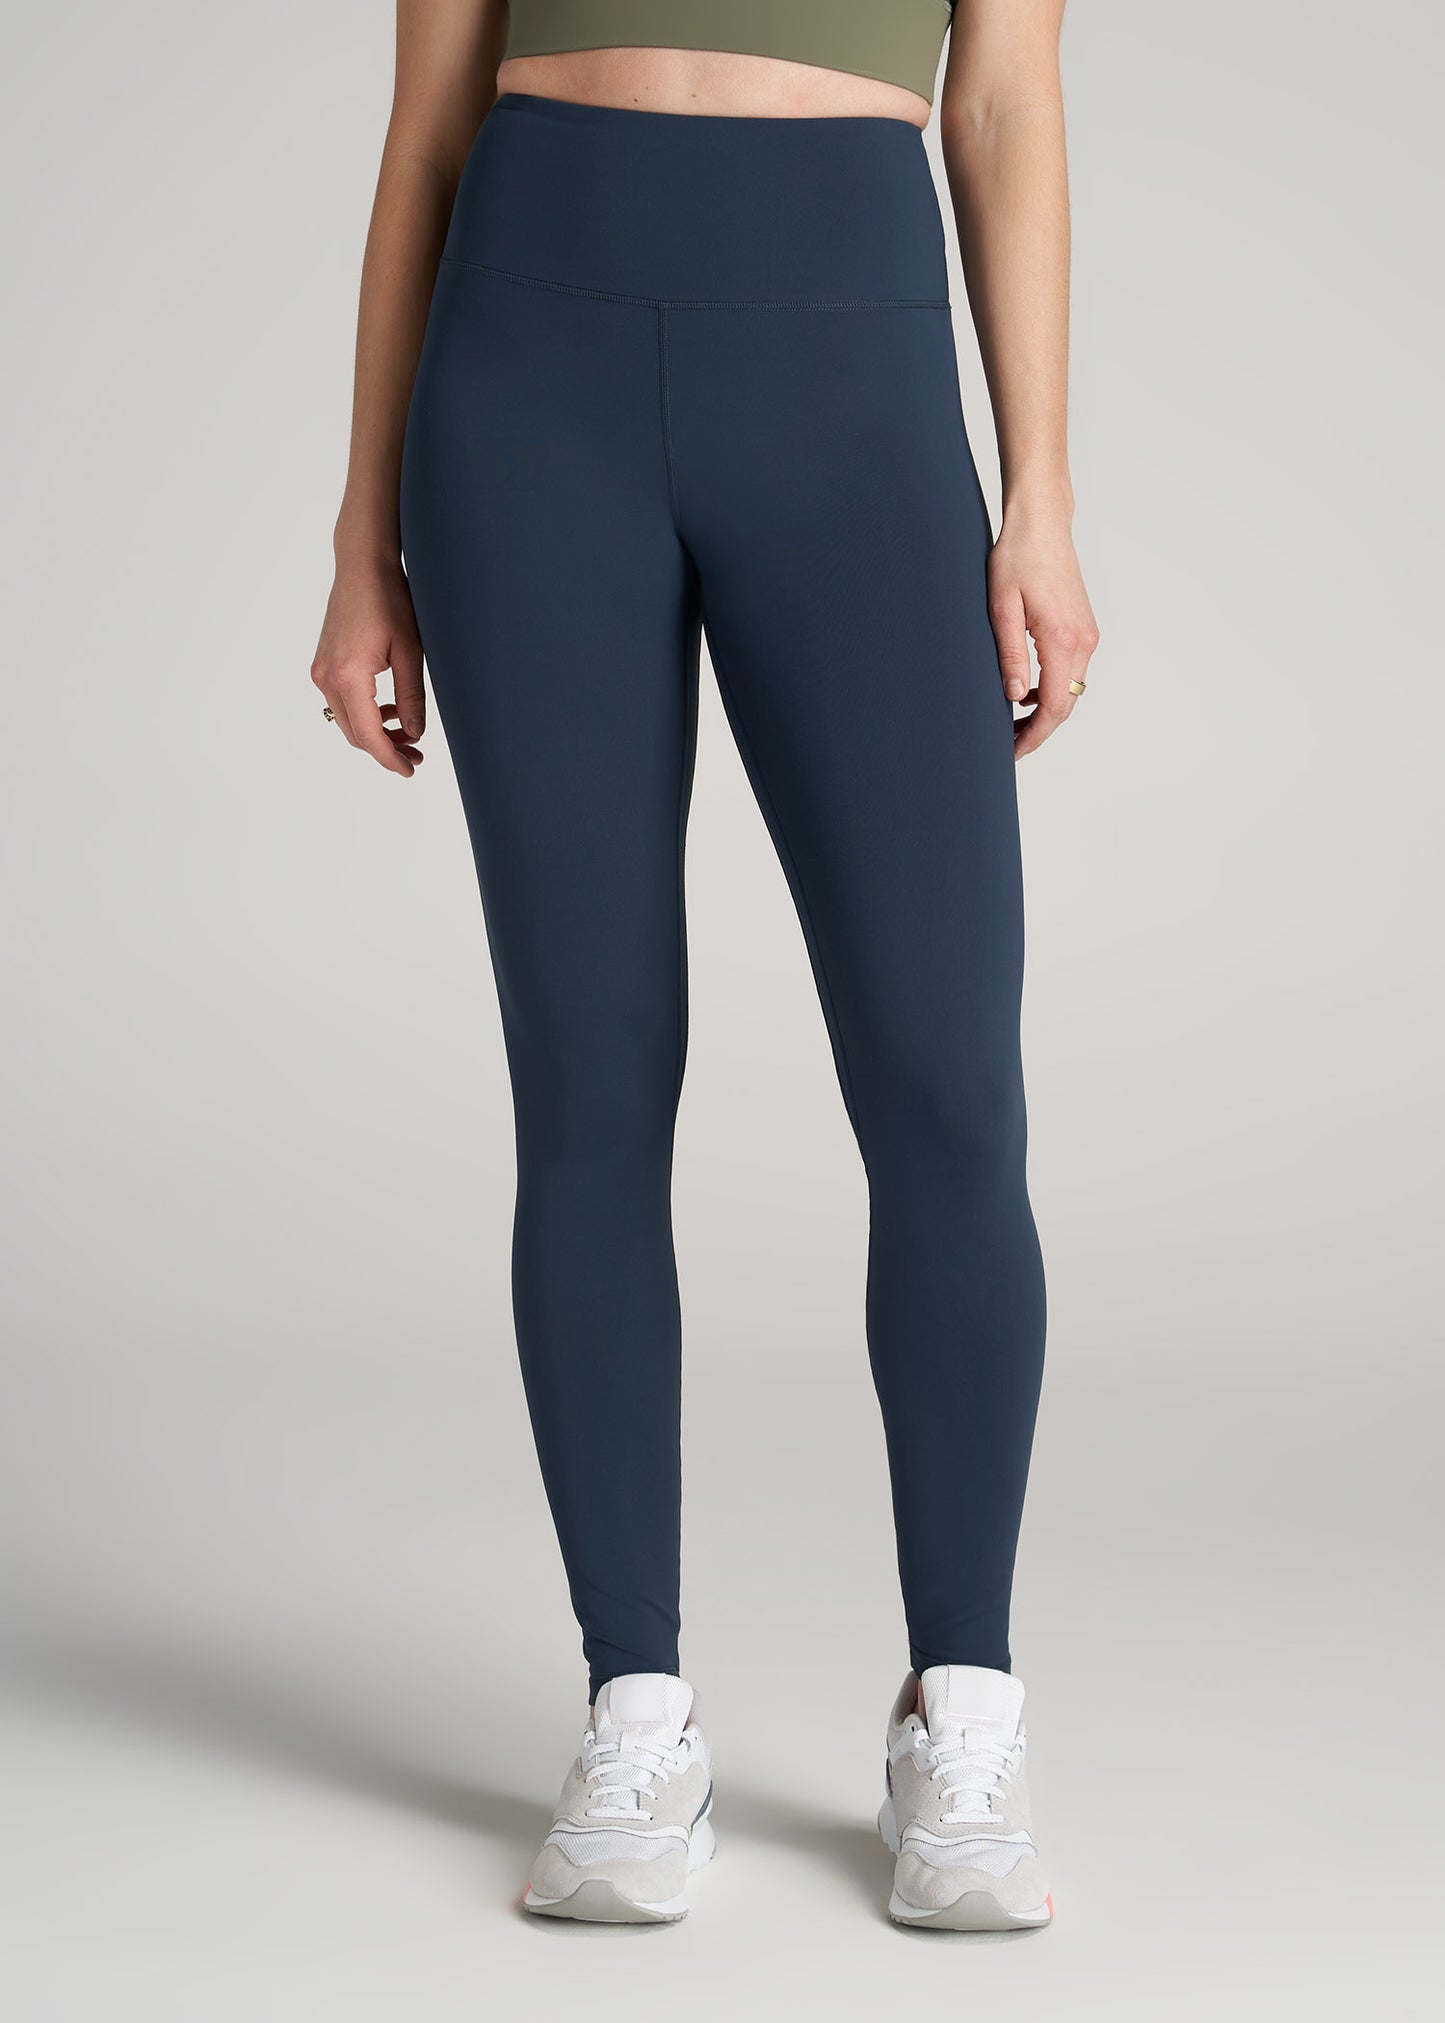 A tall woman wearing American Tall's Balance High-Rise Leggings in bright navy.